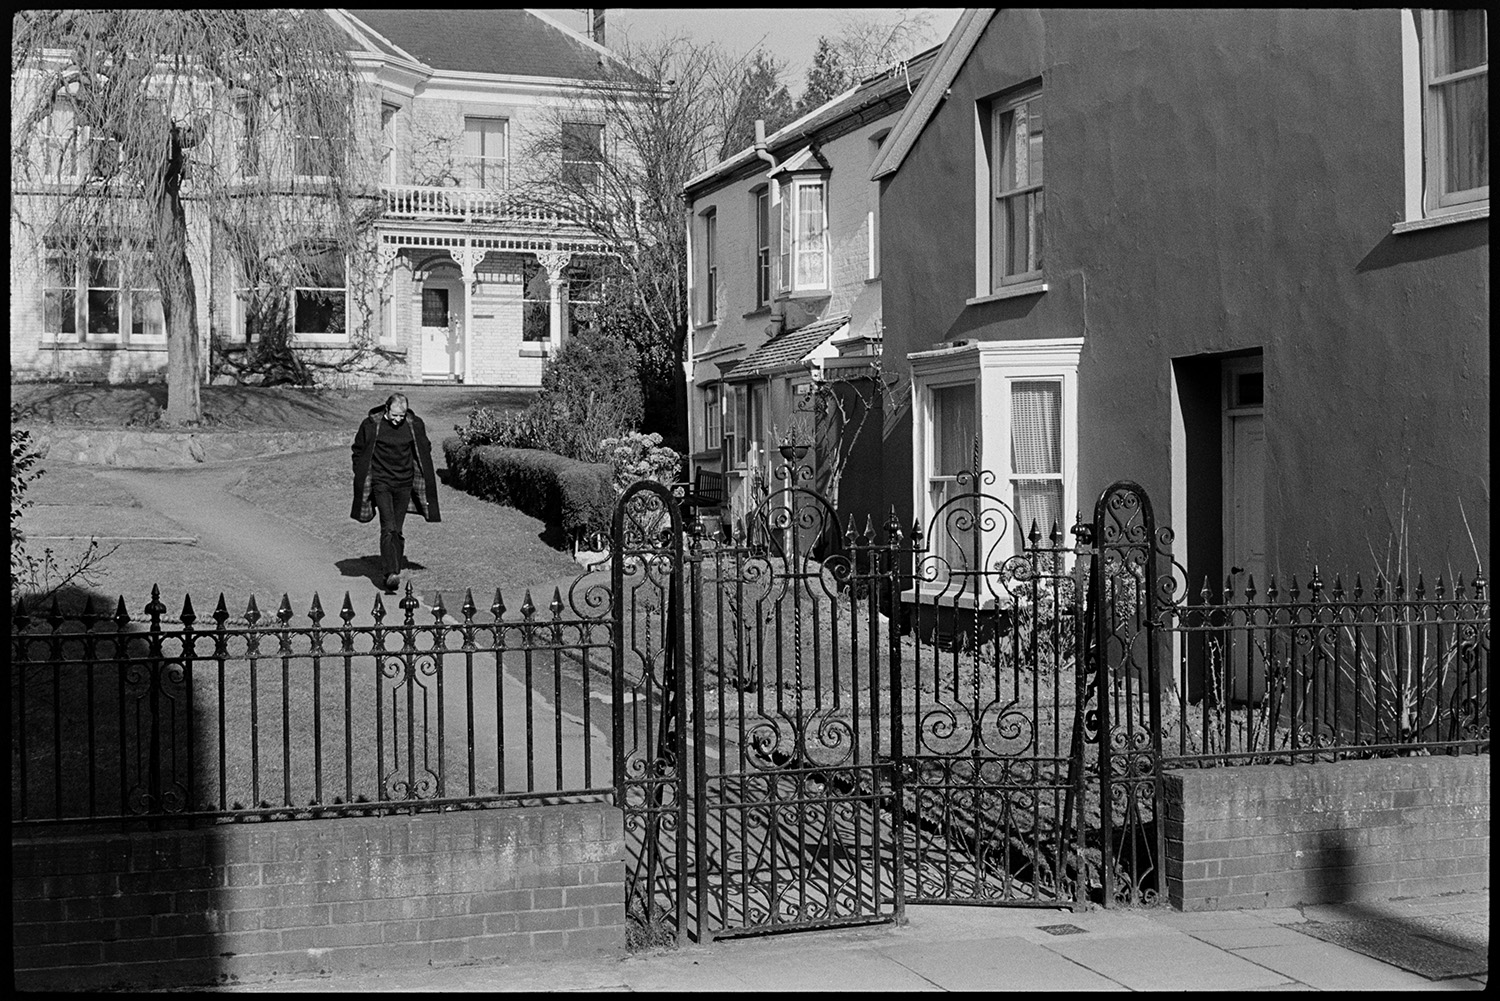 Doctor walking to see patients. 
[Doctor Richard Westcott walking past houses behind a gated entrance on his rounds to visit patients in South Molton.]